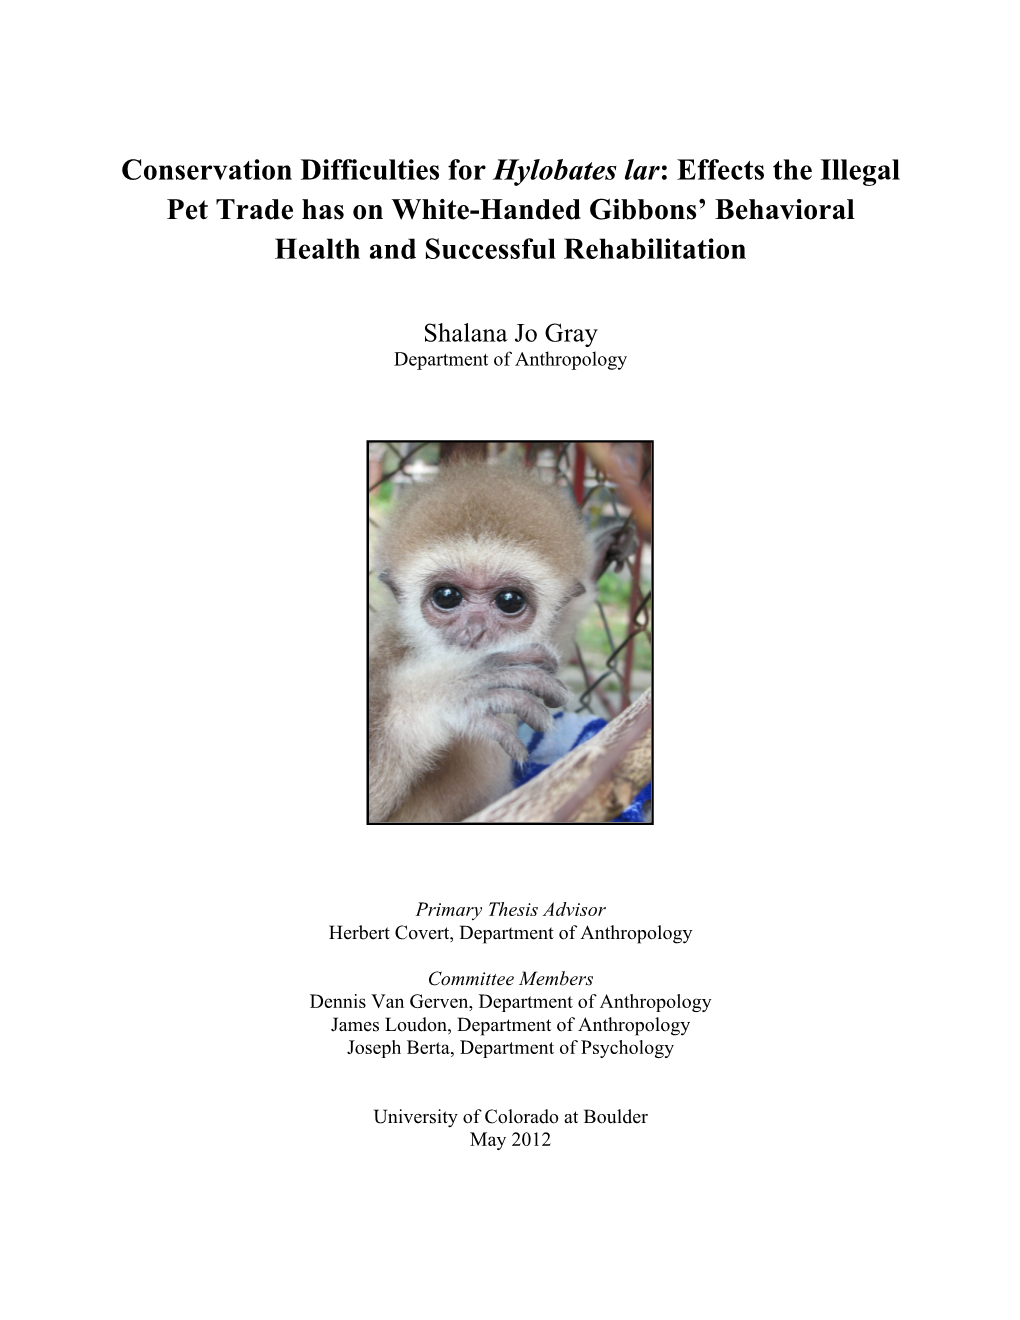 Conservation Difficulties for Hylobates Lar: Effects the Illegal Pet Trade Has on White-Handed Gibbons’ Behavioral Health and Successful Rehabilitation